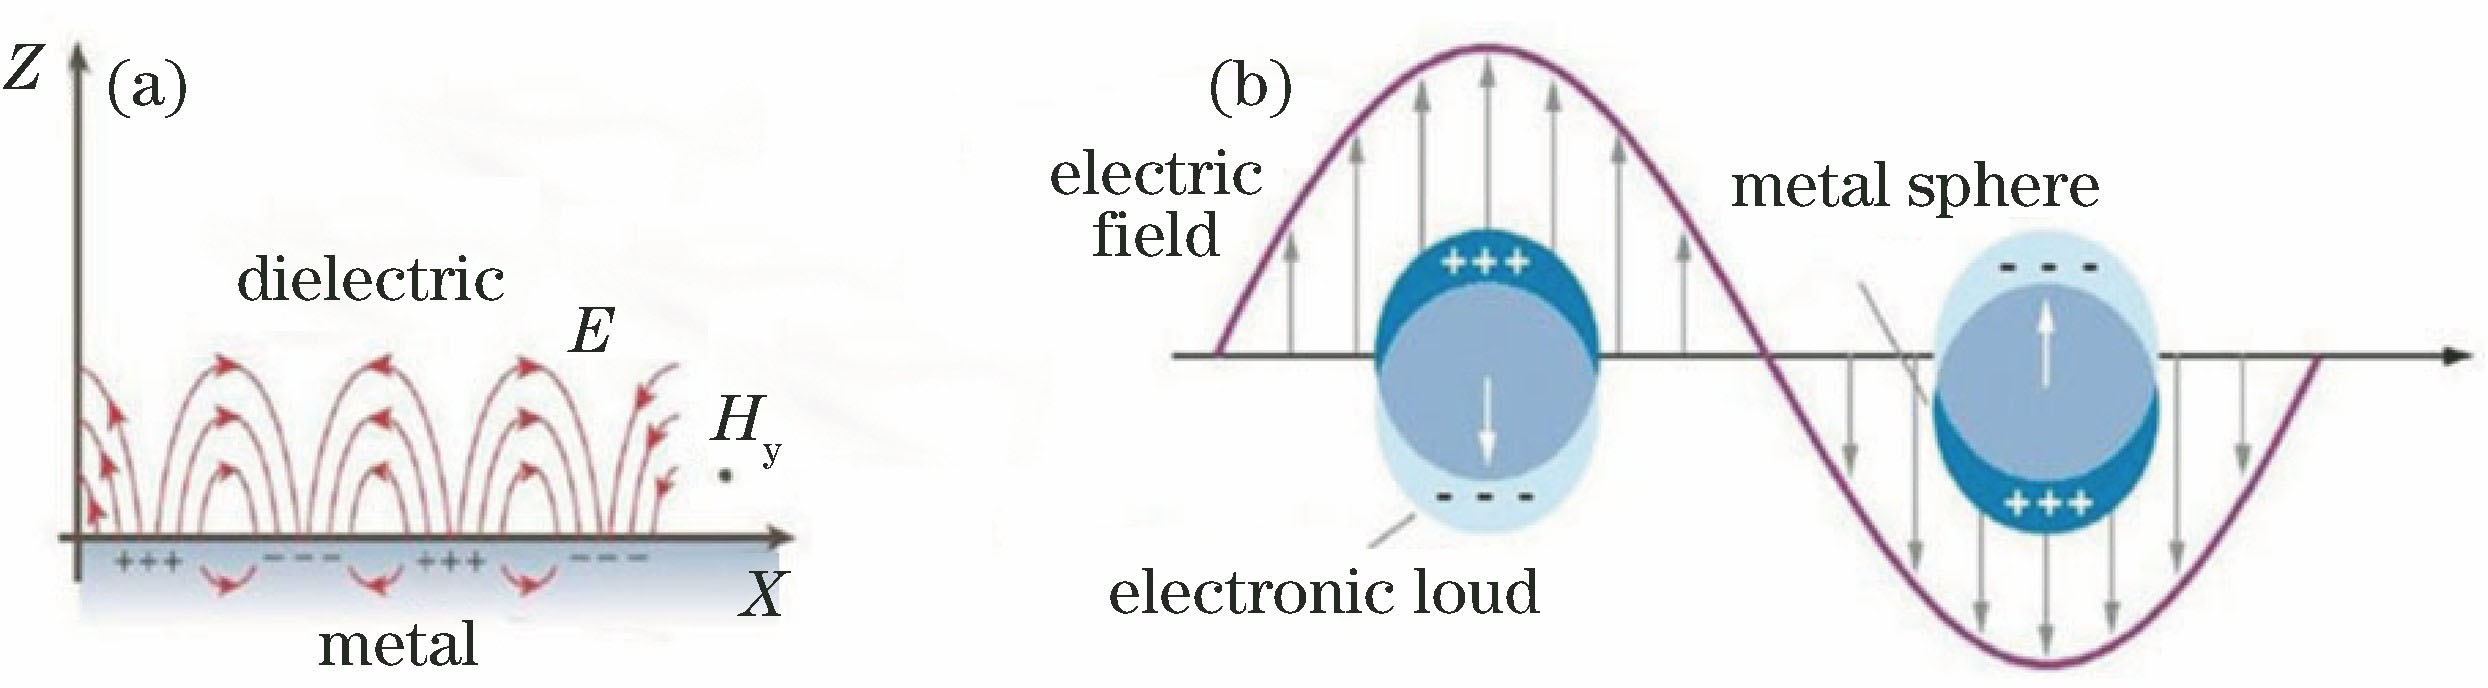 Electromagnetic field excitation processes of SPR and LSPR. (a) Schematic of electromagnetic field excitation of TM wave in metal-dielectric contact interface; (b) schematic of local surface plasmon excitation